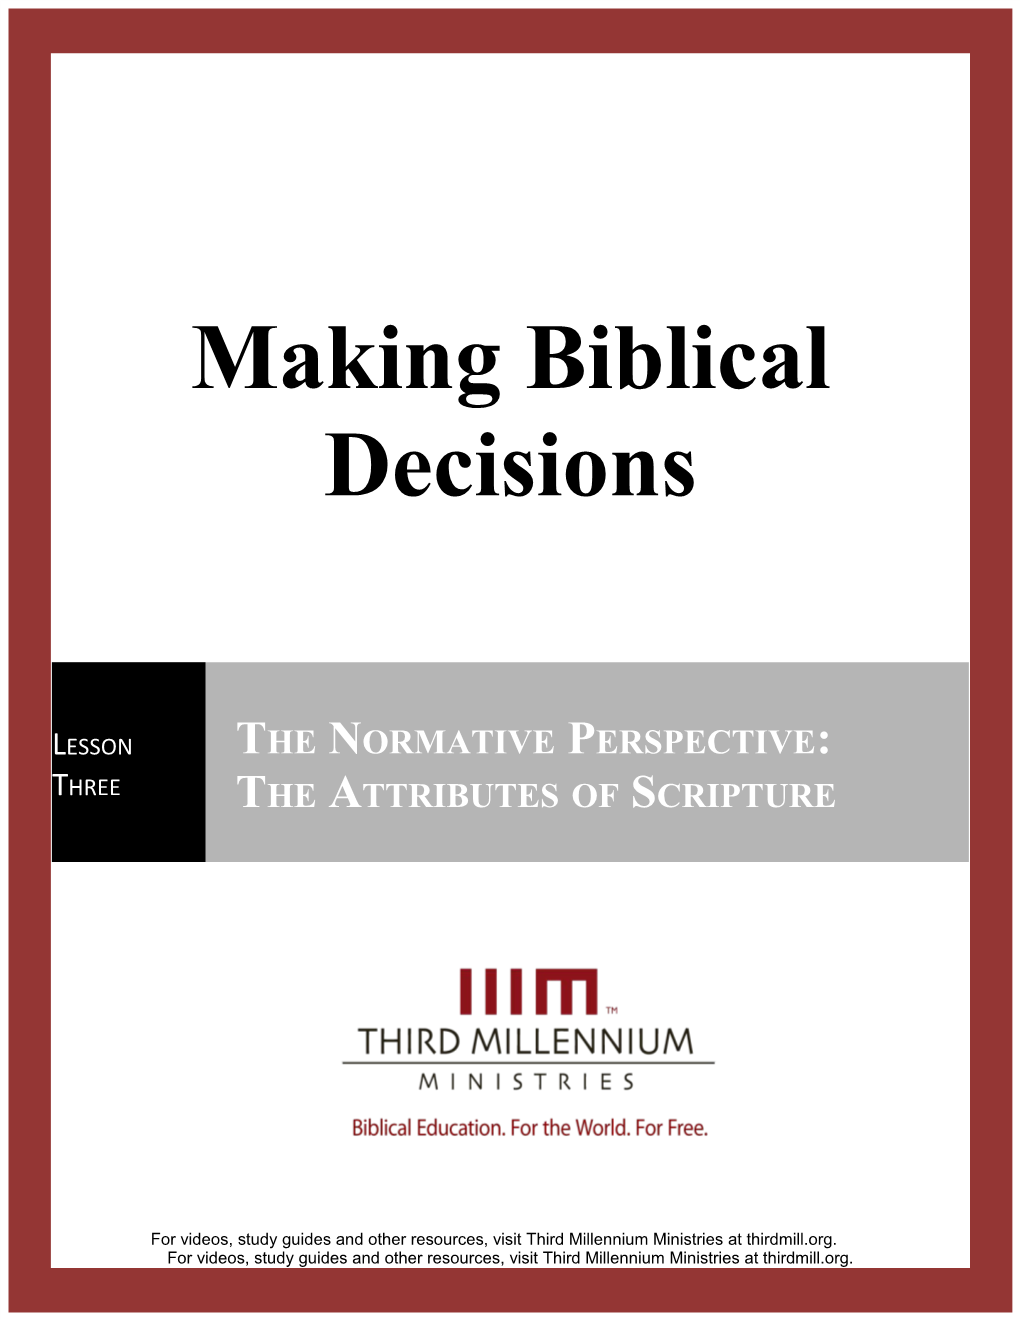 Making Biblical Decisions, Lesson 3